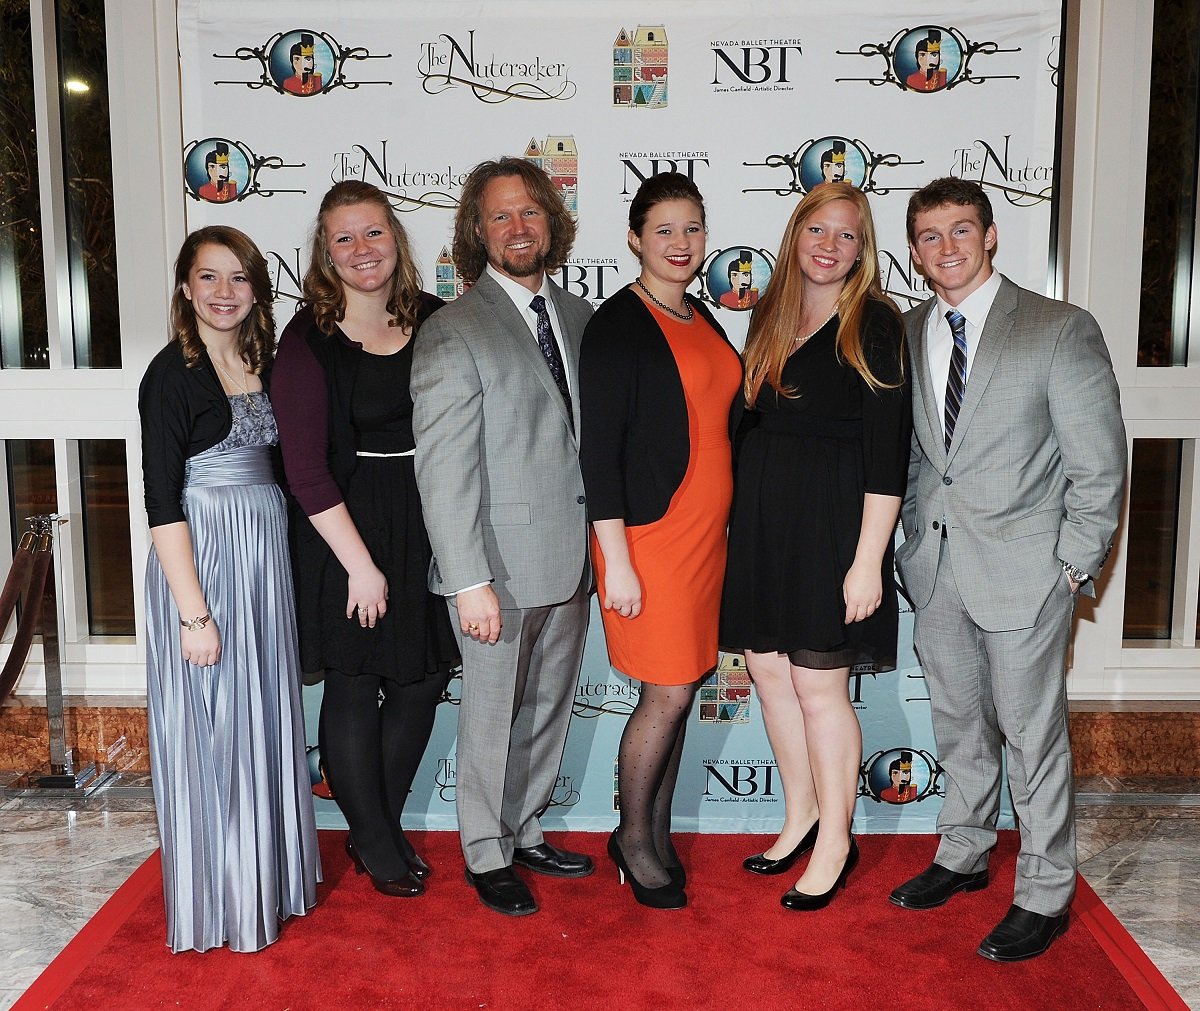 Kody Brown and kids (Aurora, Mariah, Mykelti, Aspyn, and Logan Brown) on the red carpet at Nevada Ballet Theater's "The Nutcracker" at The Smith Center For The Performing Arts in 2013 in Las Vegas, Nevada